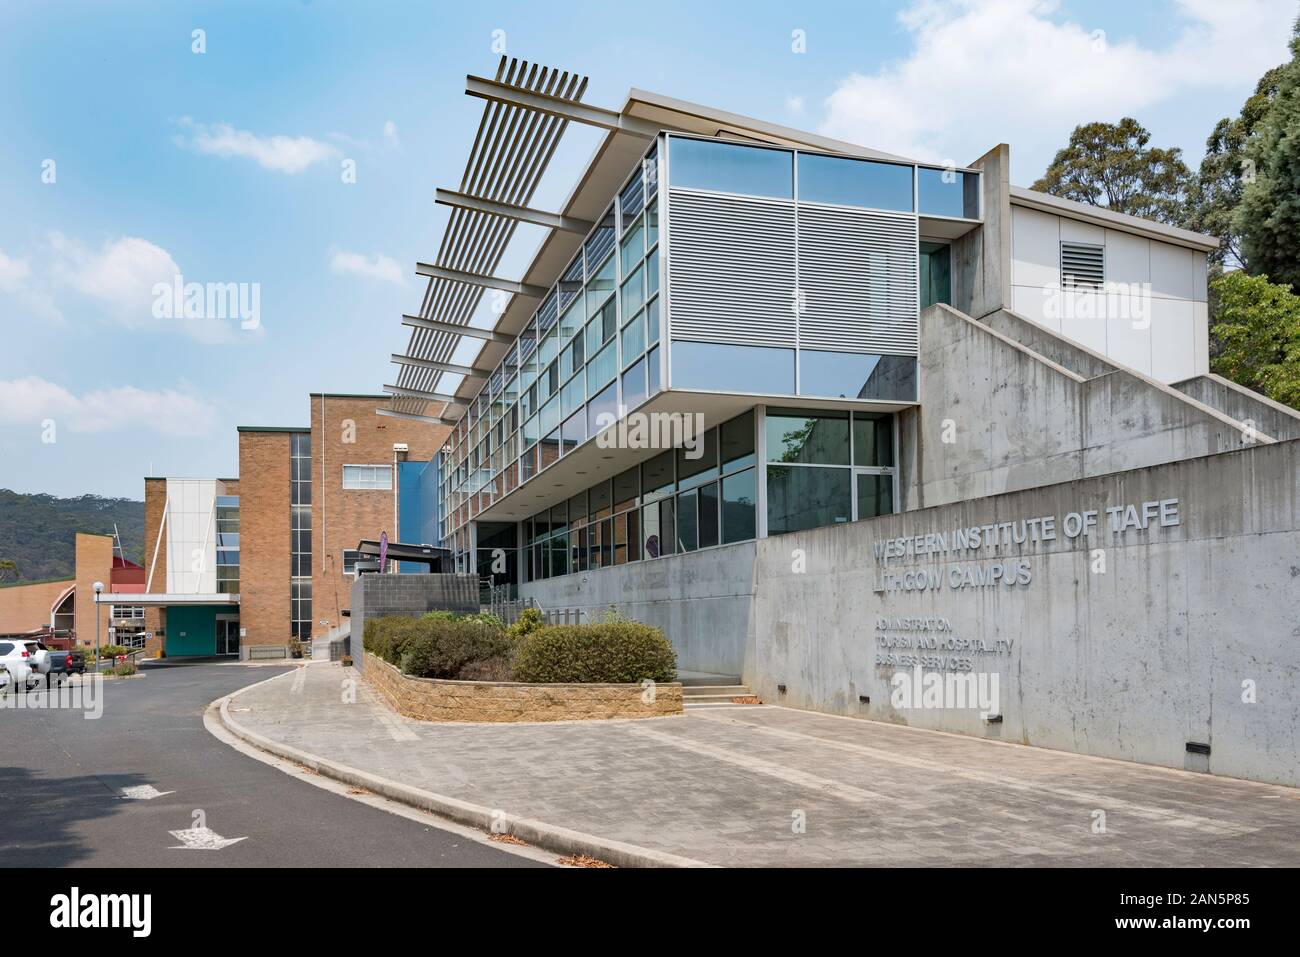 The Western Institute of TAFE, Lithgow Campus is a combination of buildings built over many years with the latest of pre-form concrete steel and glass Stock Photo